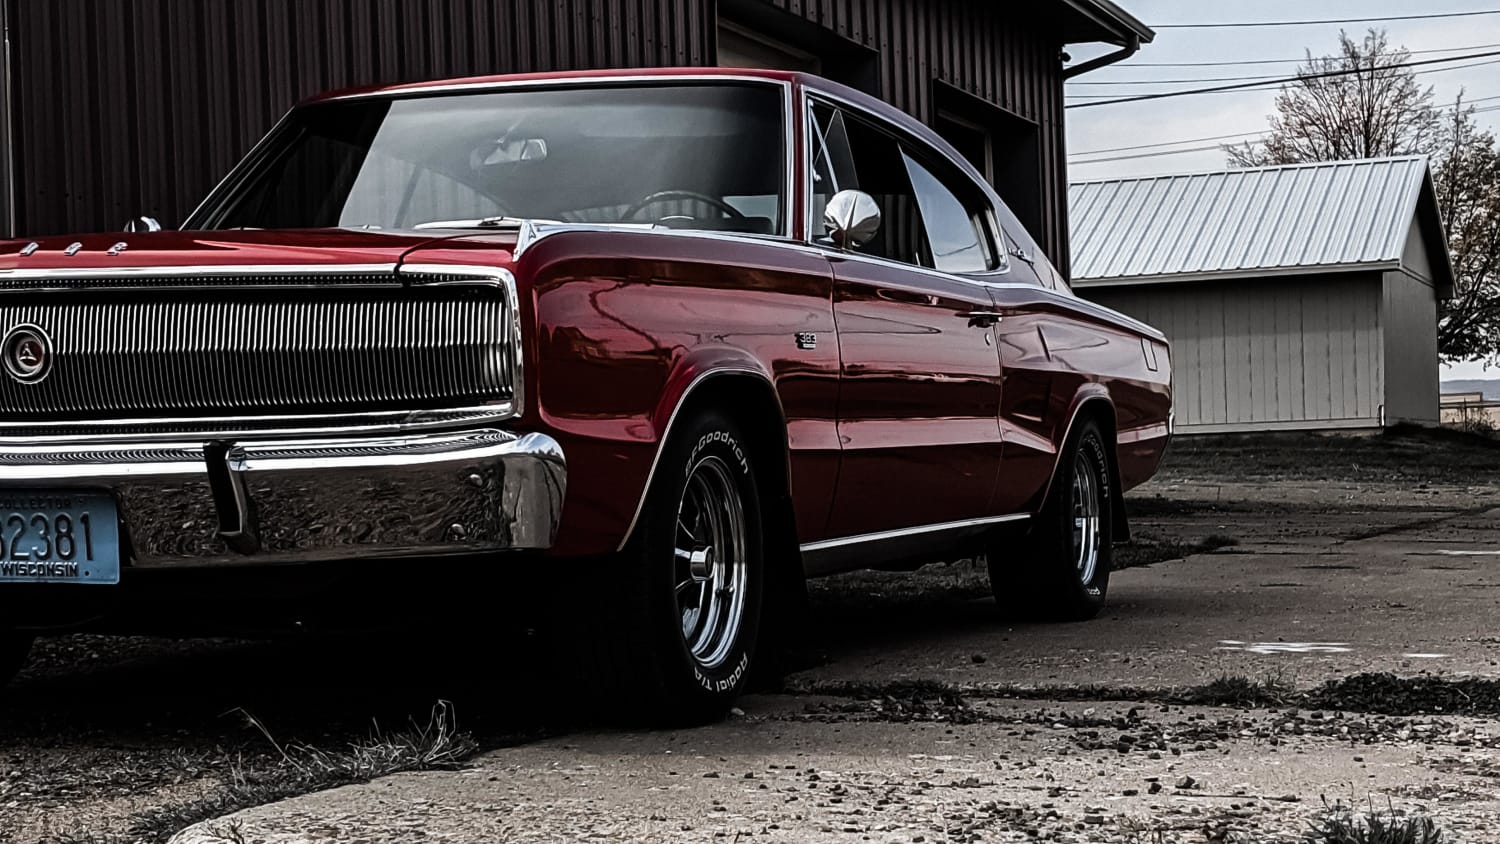 ITAP 1967 Dodge Charger